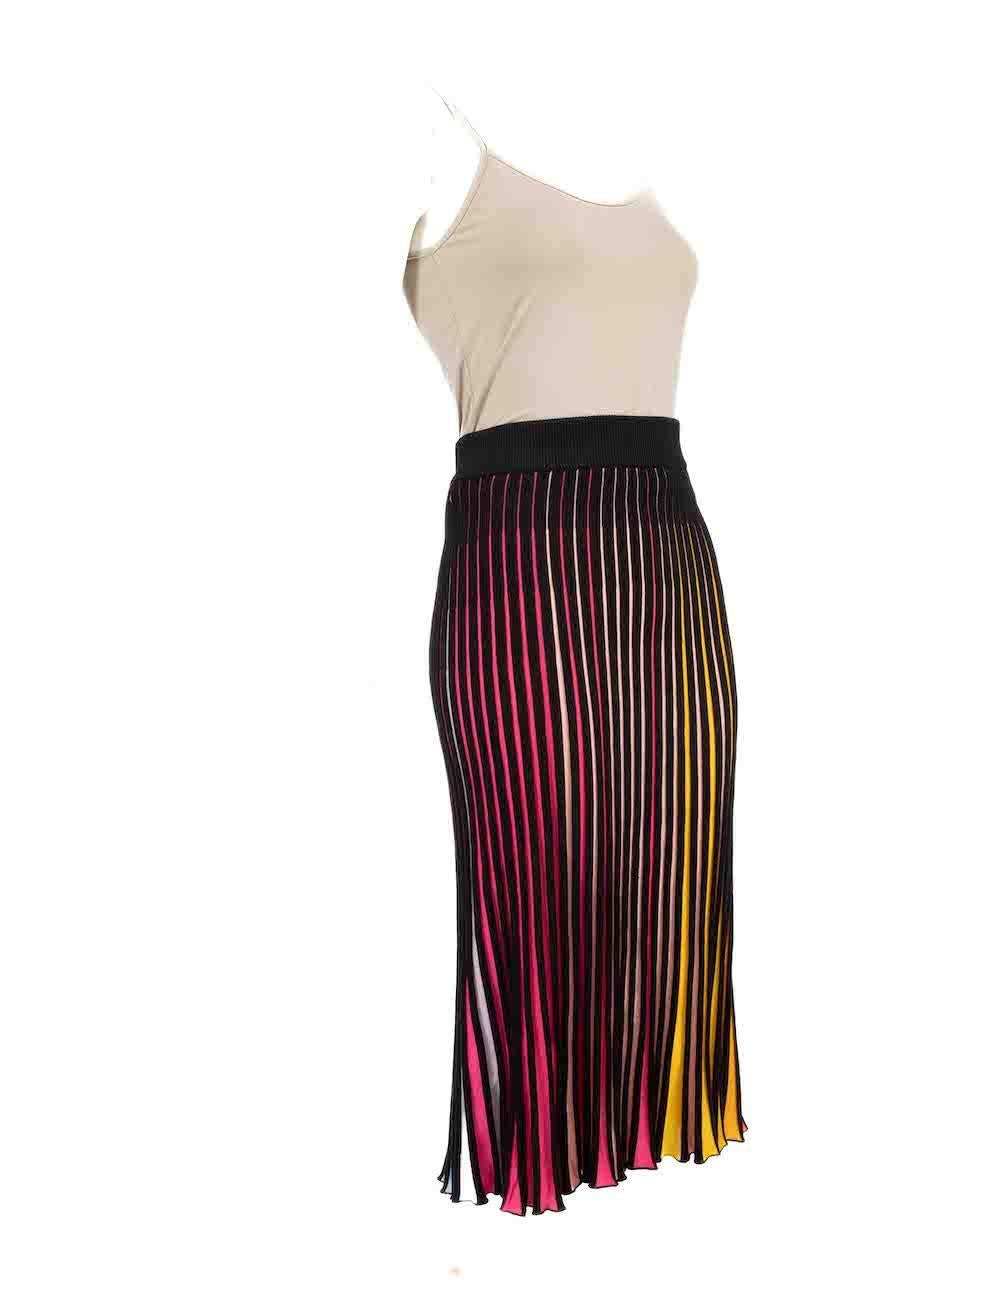 CONDITION is Very good. Hardly any visible wear to skirt is evident on this used Kenzo designer resale item.
 
 
 
 Details
 
 
 Multicolour
 
 Synthetic
 
 Knit skirt
 
 Midi
 
 Pleated
 
 Striped pattern
 
 Elasticated waistband
 
 
 
 
 
 NO